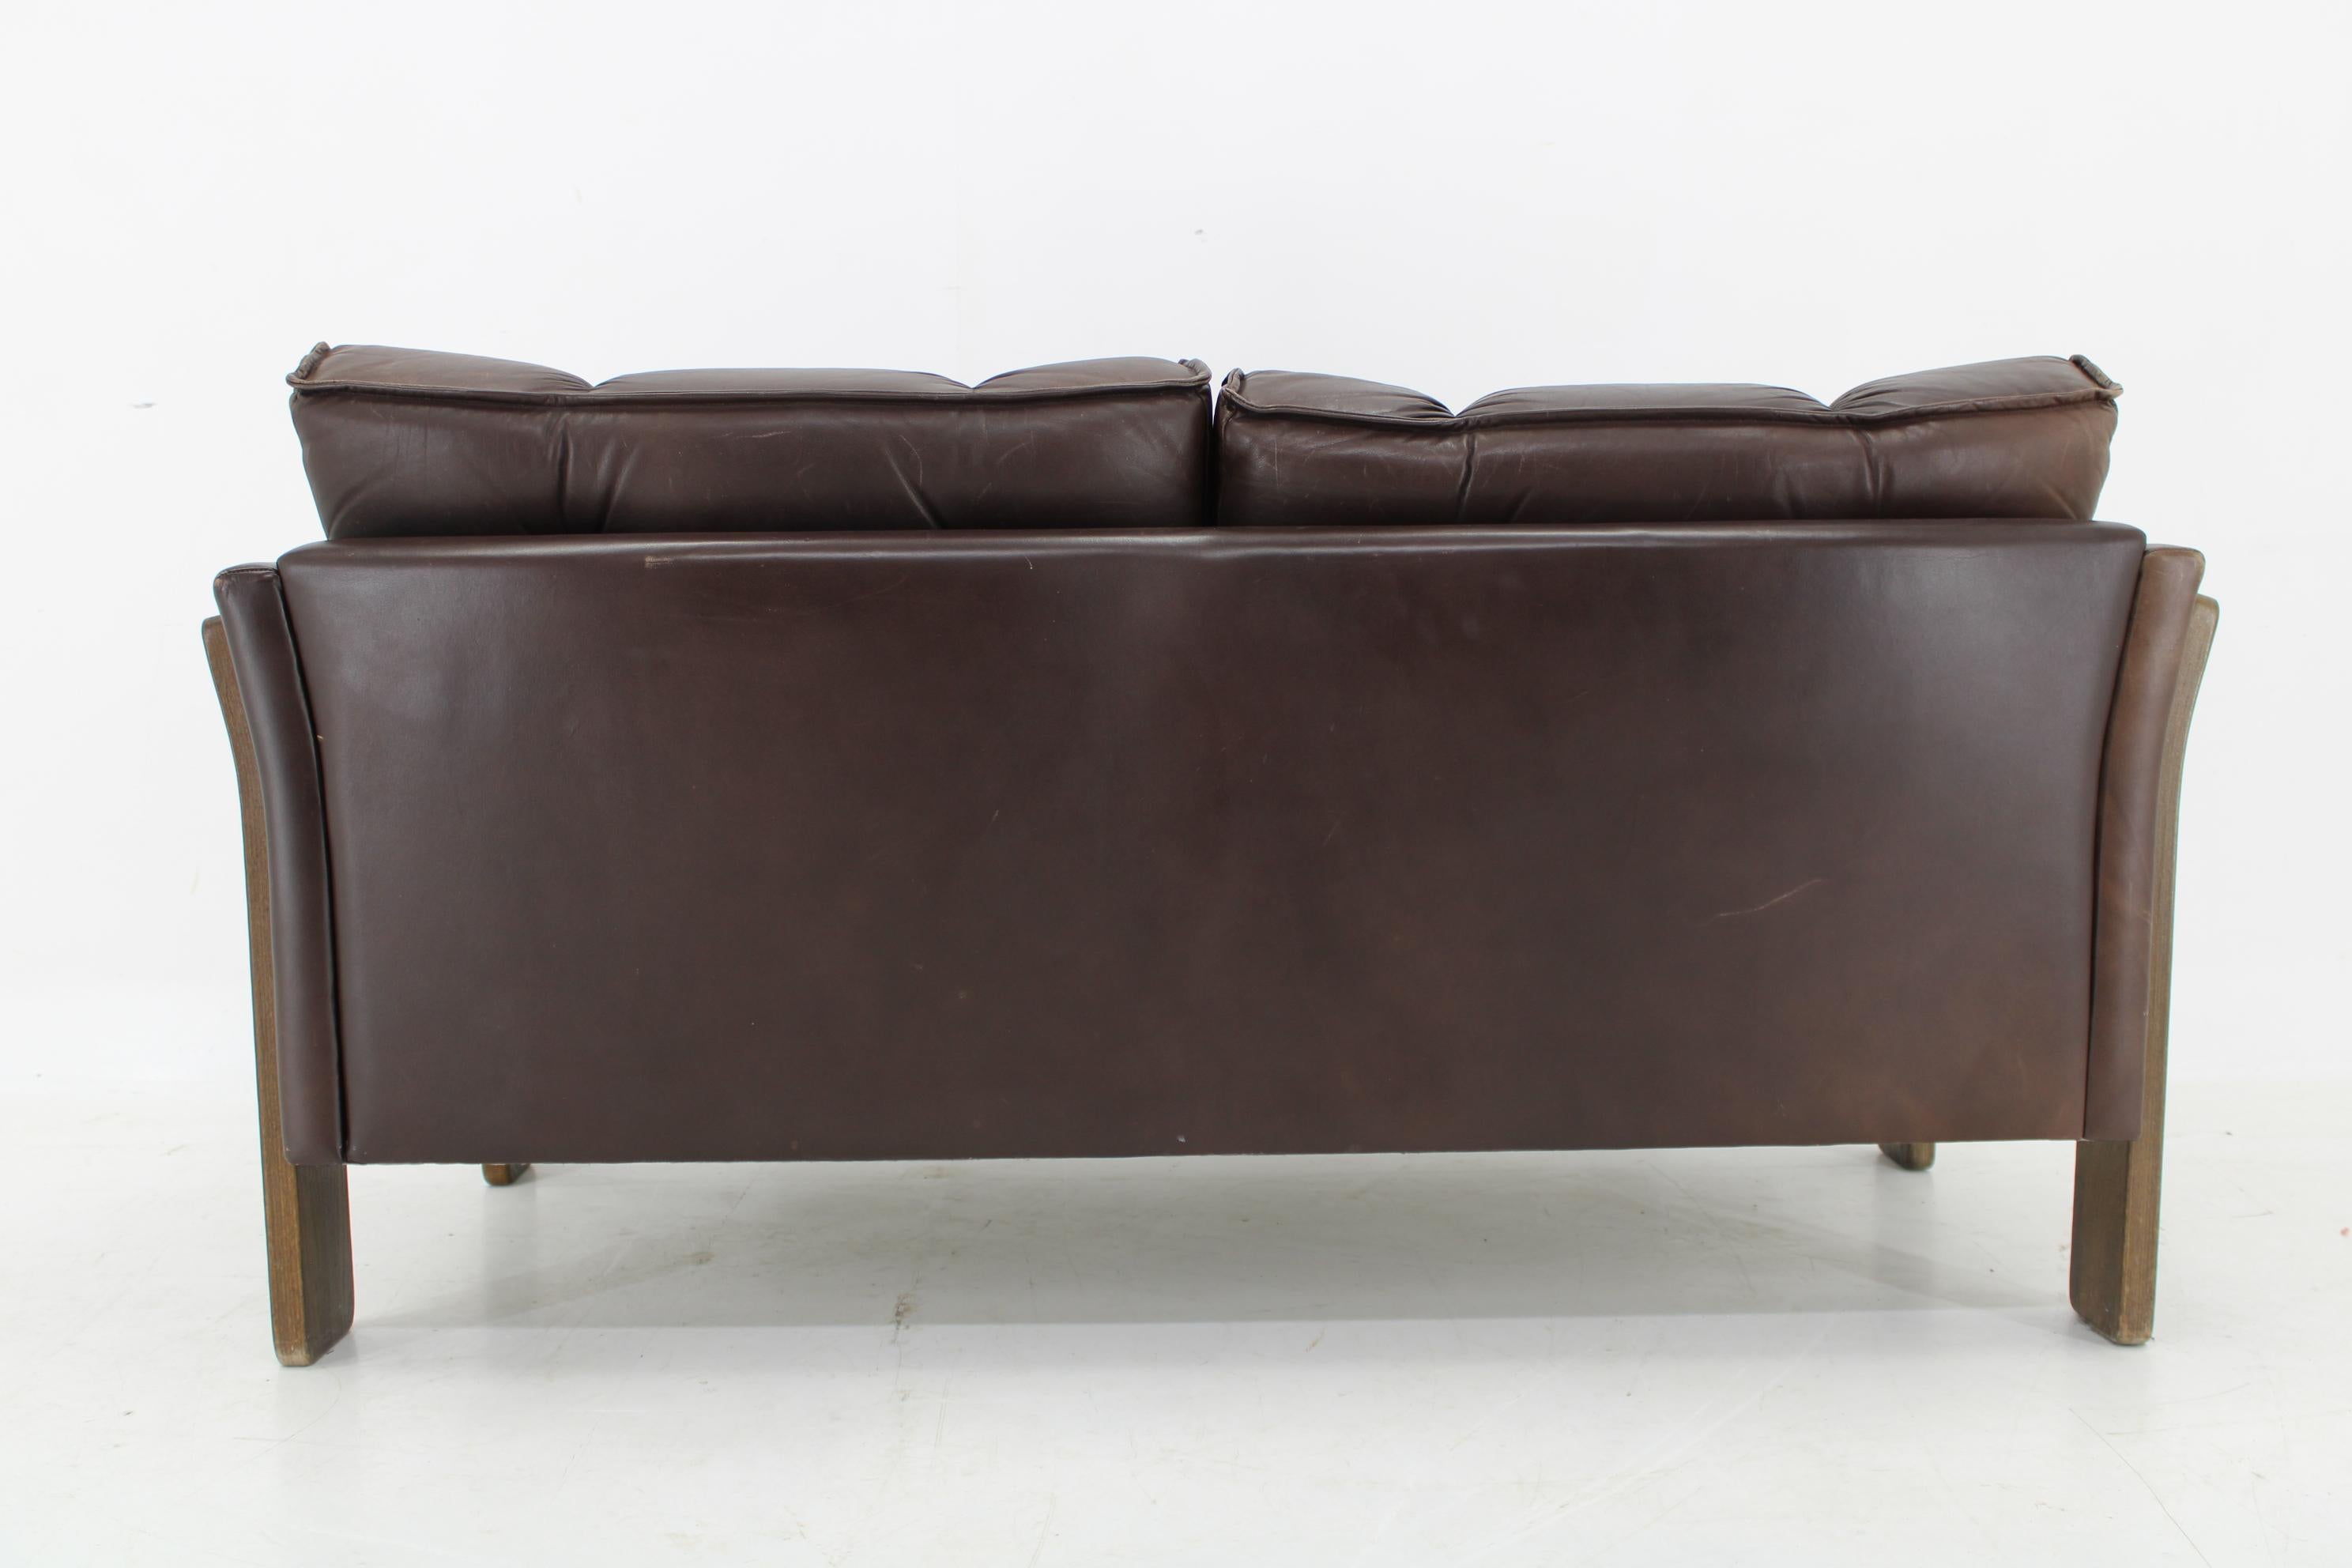 1970s Brown Leather 2-Seater Sofa, Denmark For Sale 14